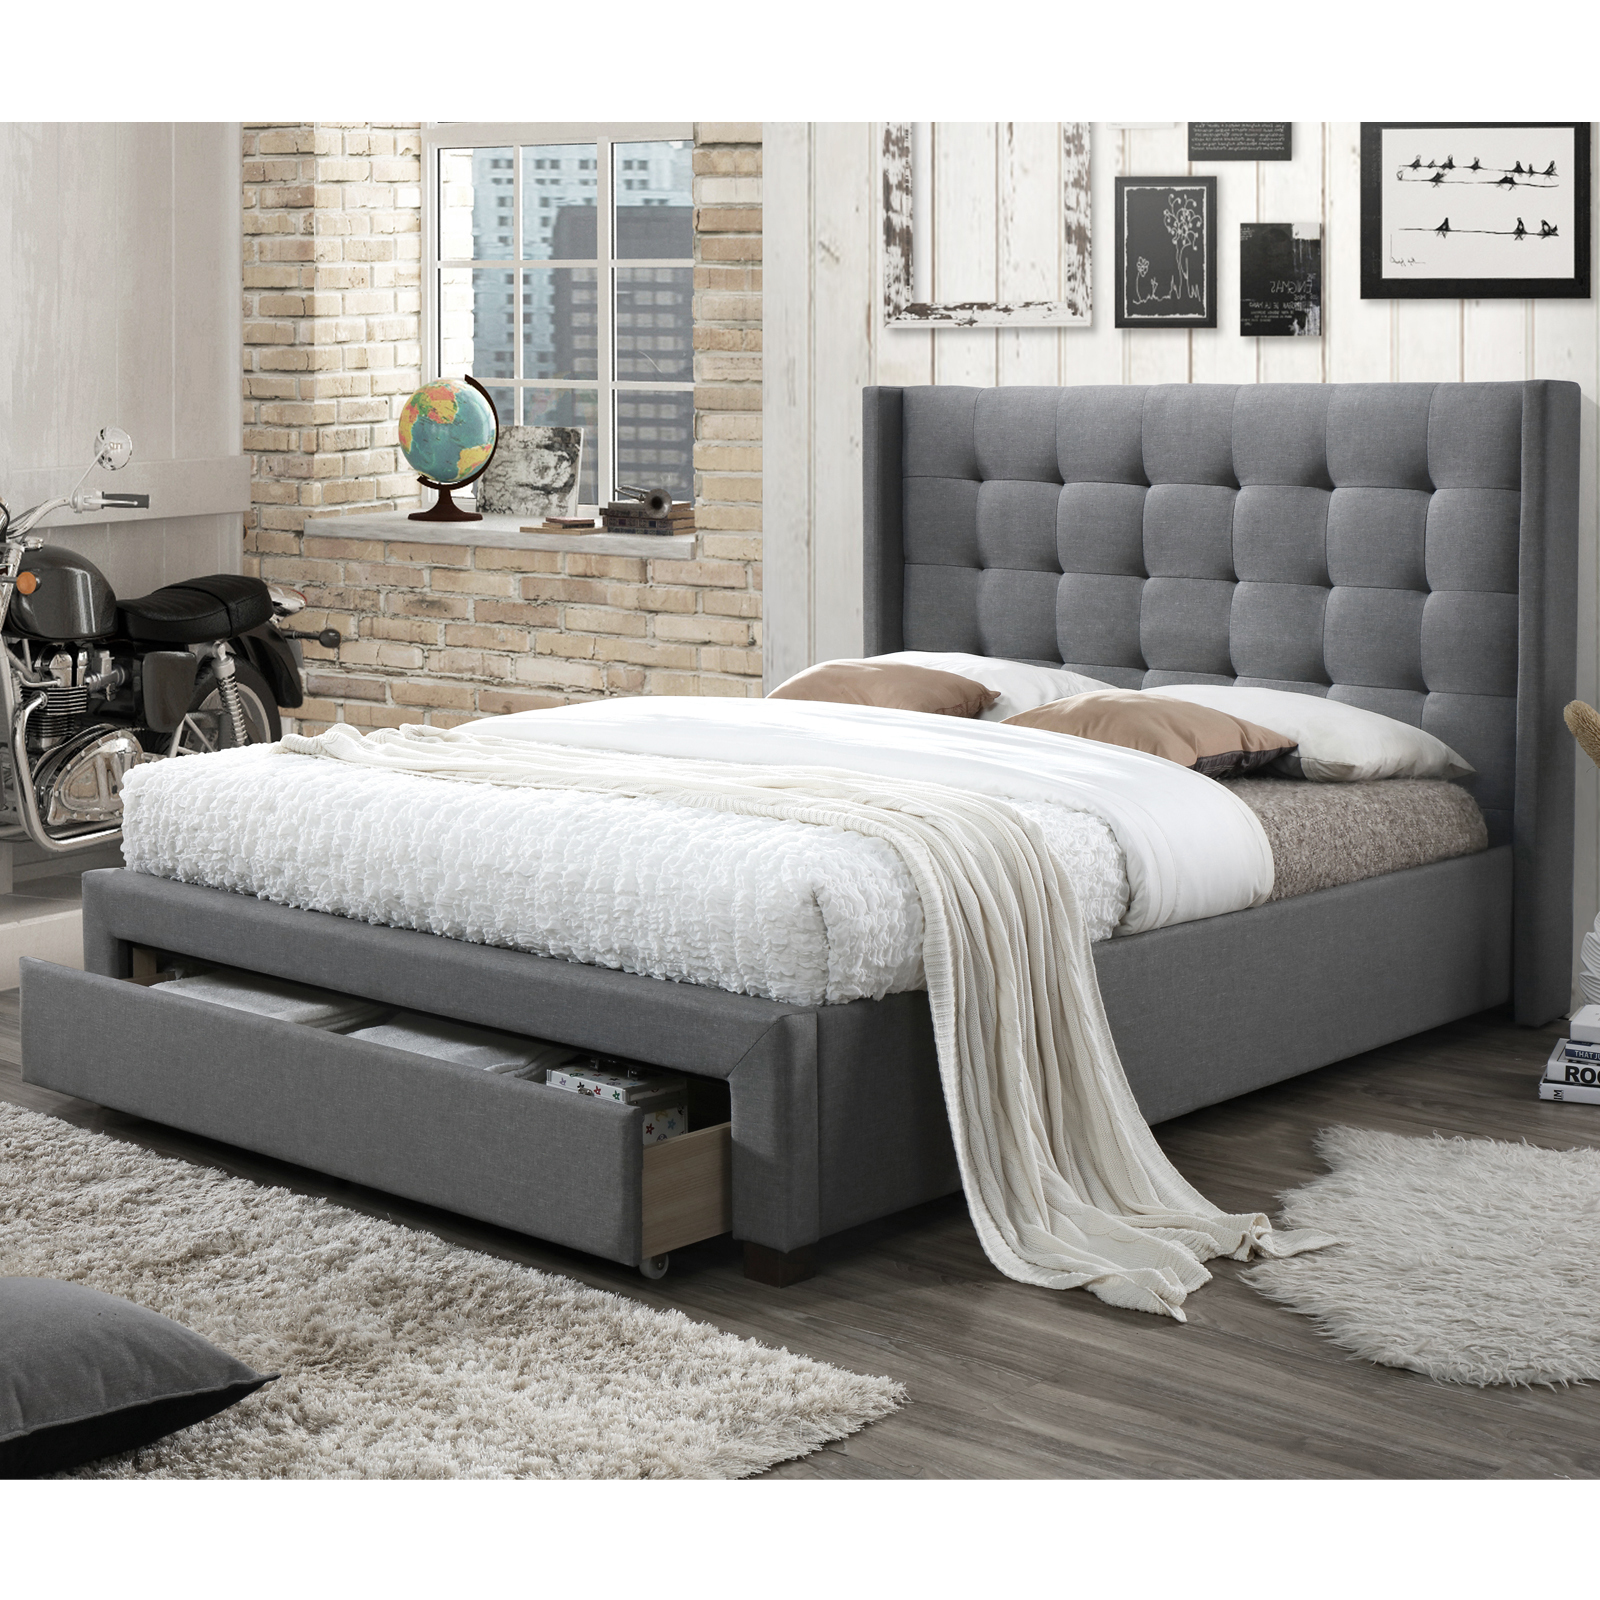 VIC Furniture Atlanta Queen Bed with Storage & Reviews | Temple ...